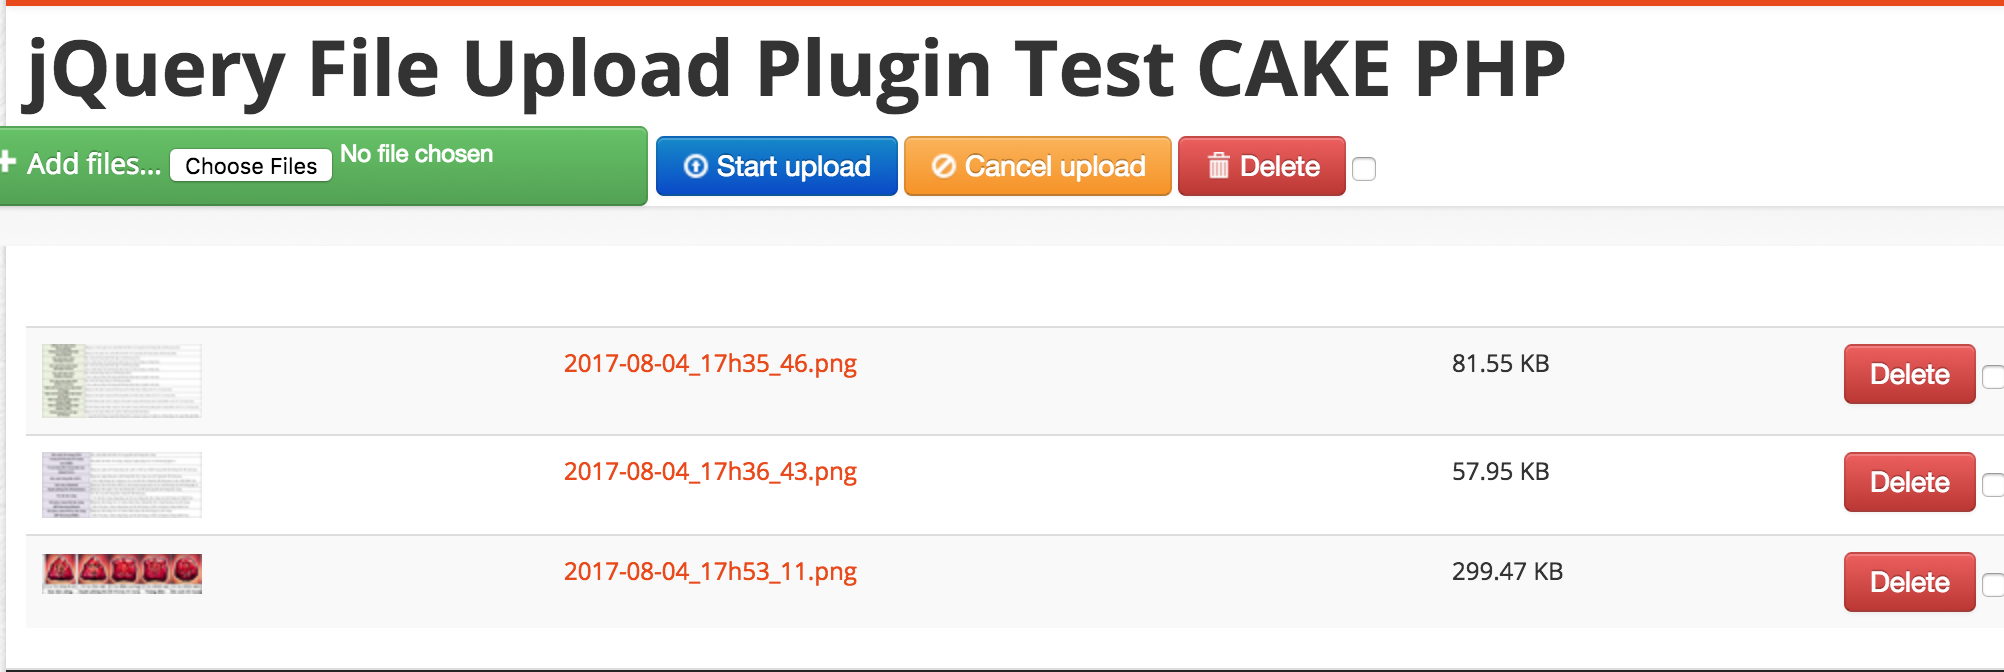 jquery file upload cakephp 2.0